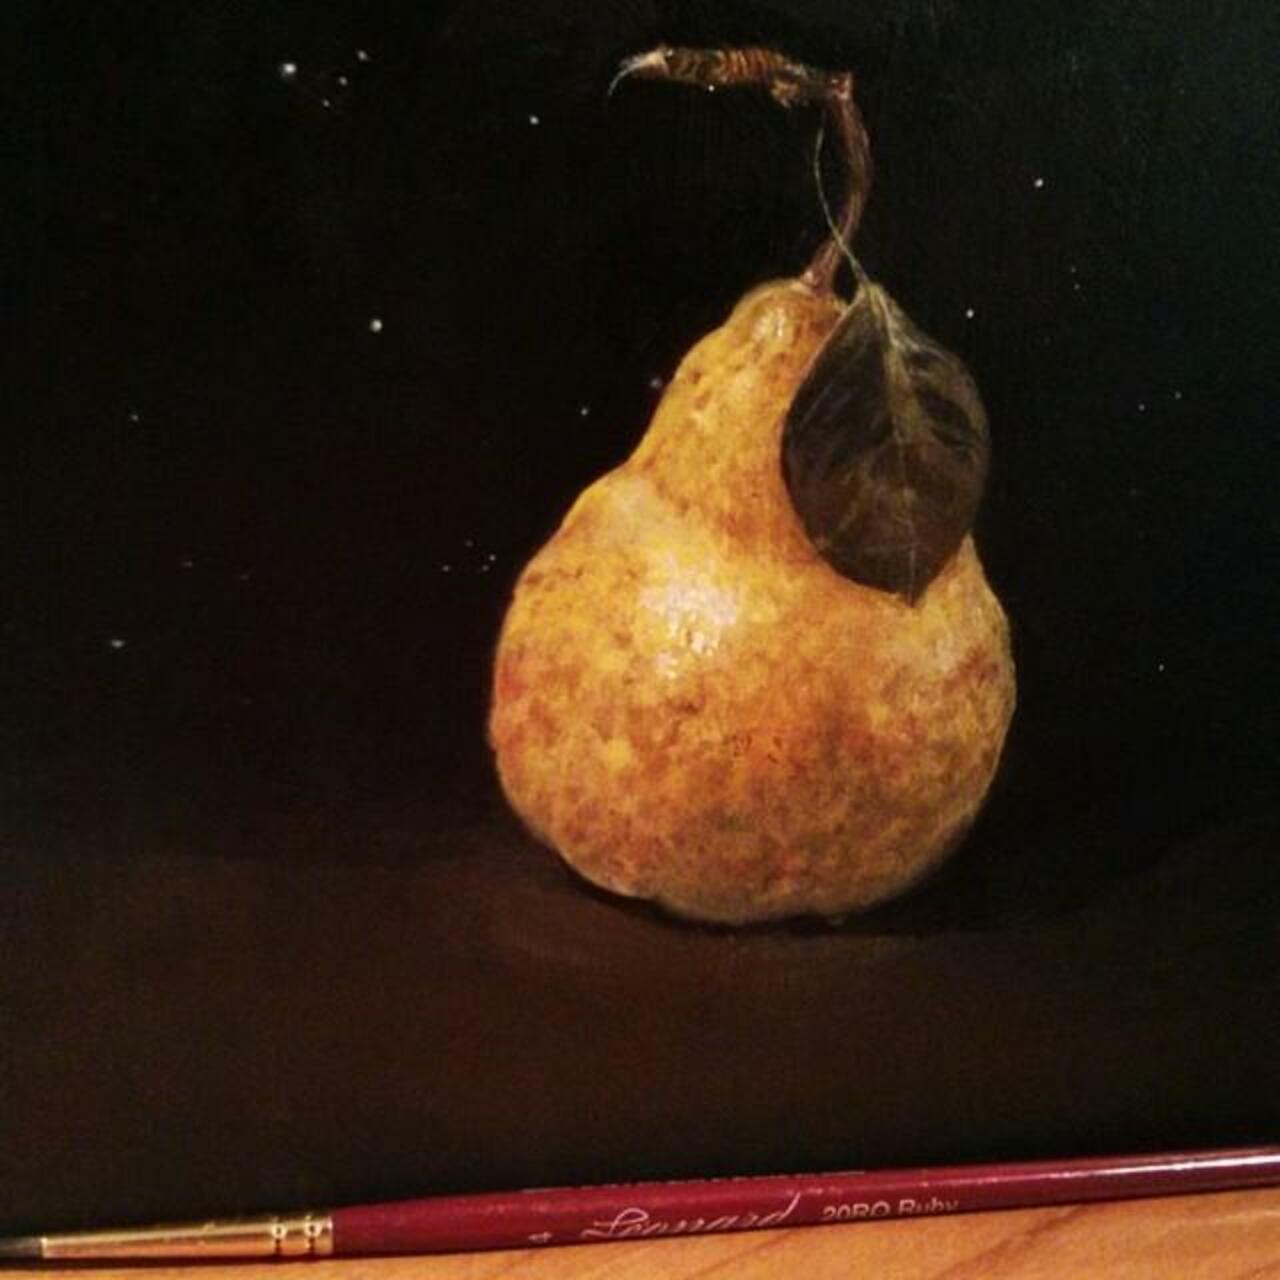 Nearly finished the pear in this #wip #painting #contemporary #art #stilllife #tweet http://t.co/jd4PcfC0eL